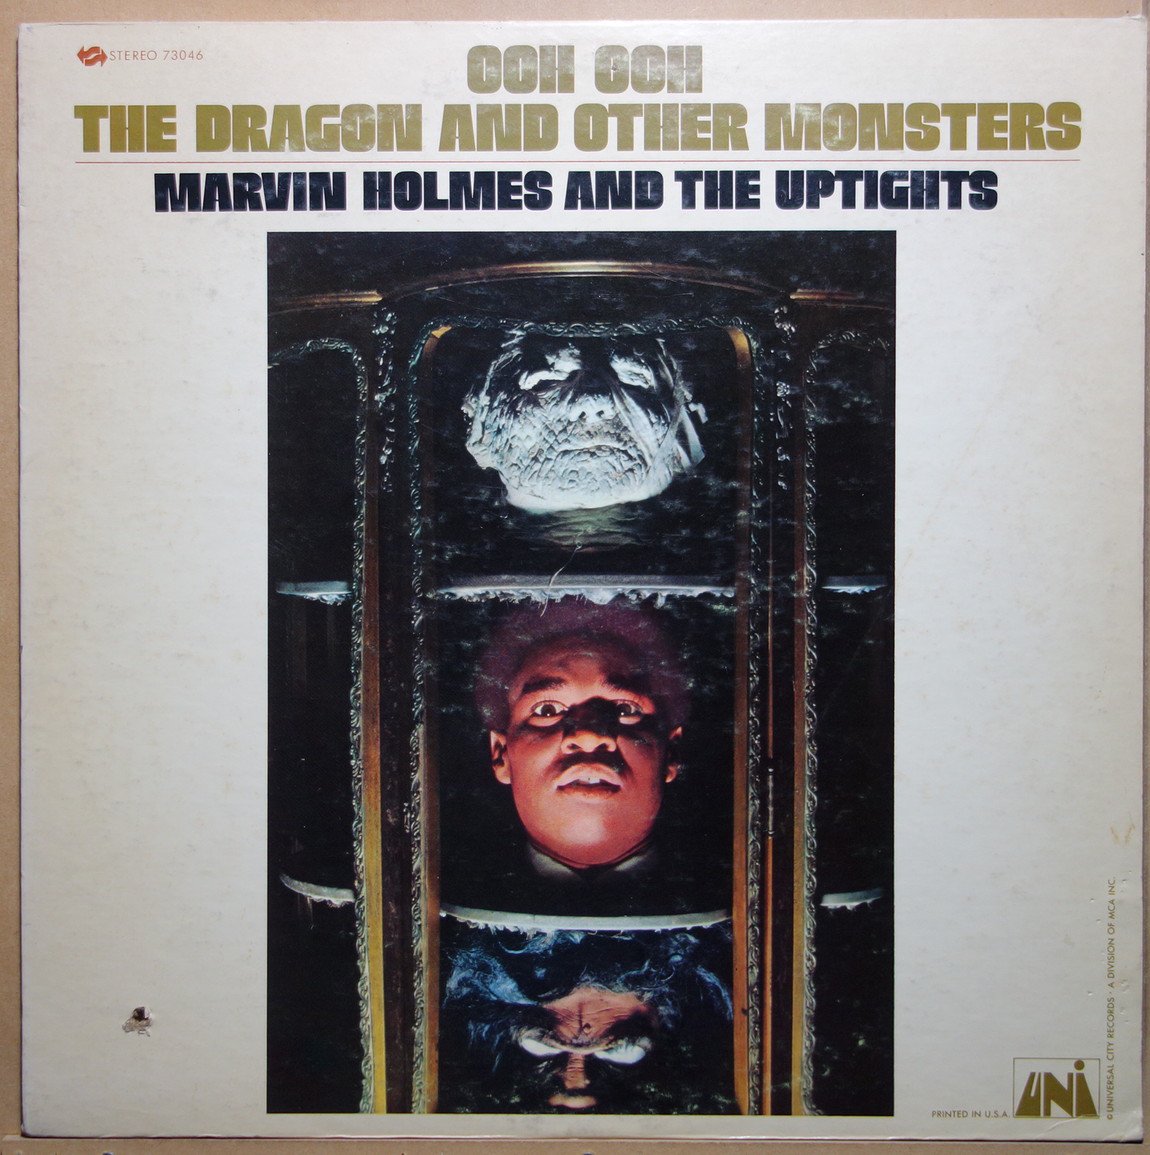 The　Record　Other　Uptights　And　And　Vinylian　Ooh　Marvin　Vinyl　Monsters　Holmes　Shop　Dragon　The　Ooh　Vintage